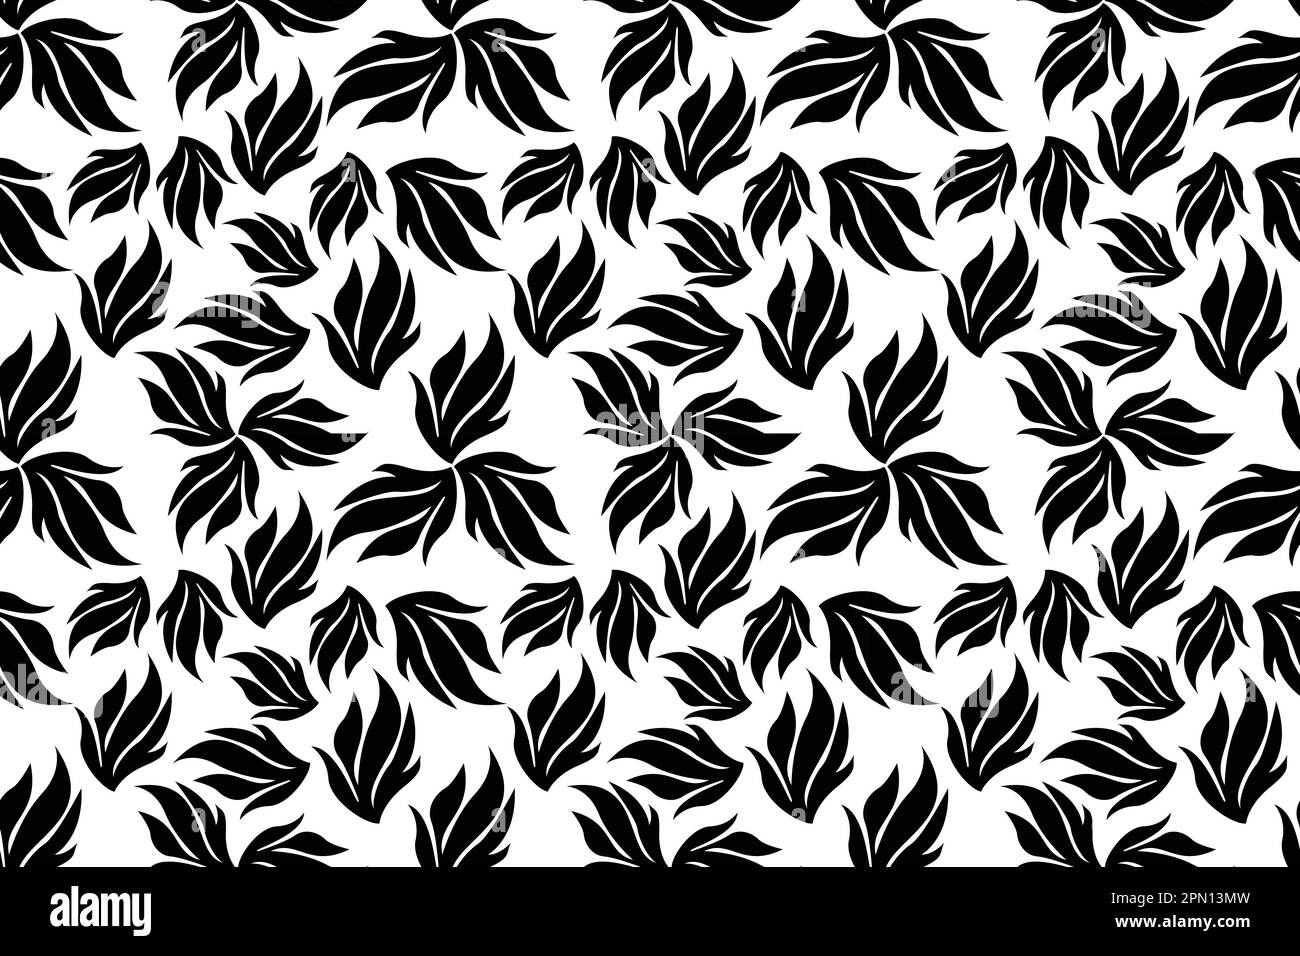 60's floral print Black and White Stock Photos & Images - Alamy